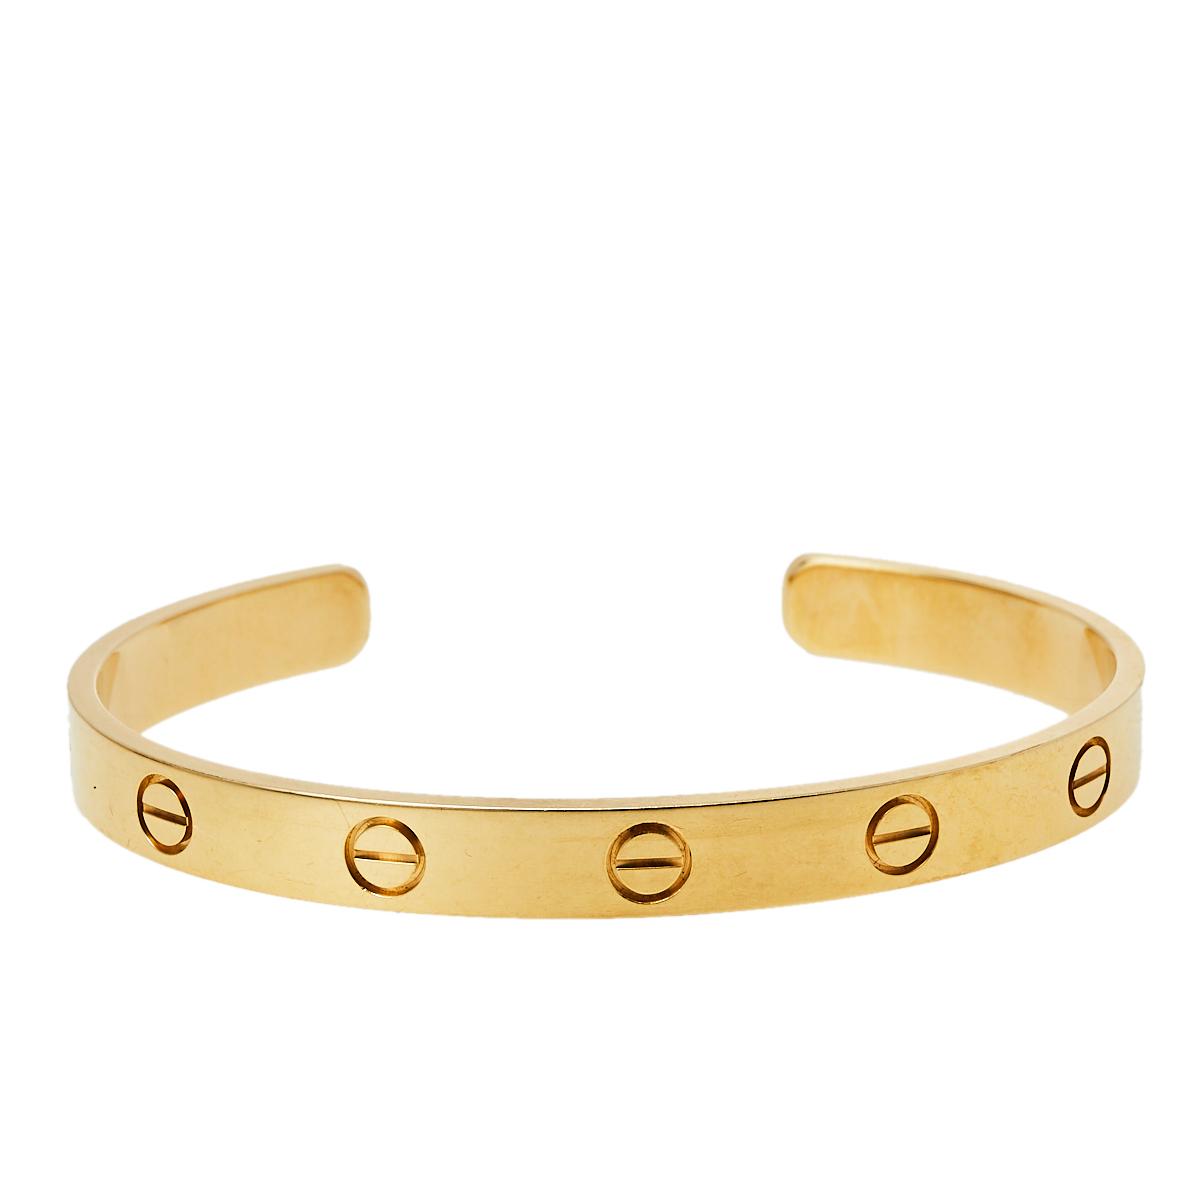 Pre-owned Cartier Love 18k Yellow Gold Cuff Bracelet 17